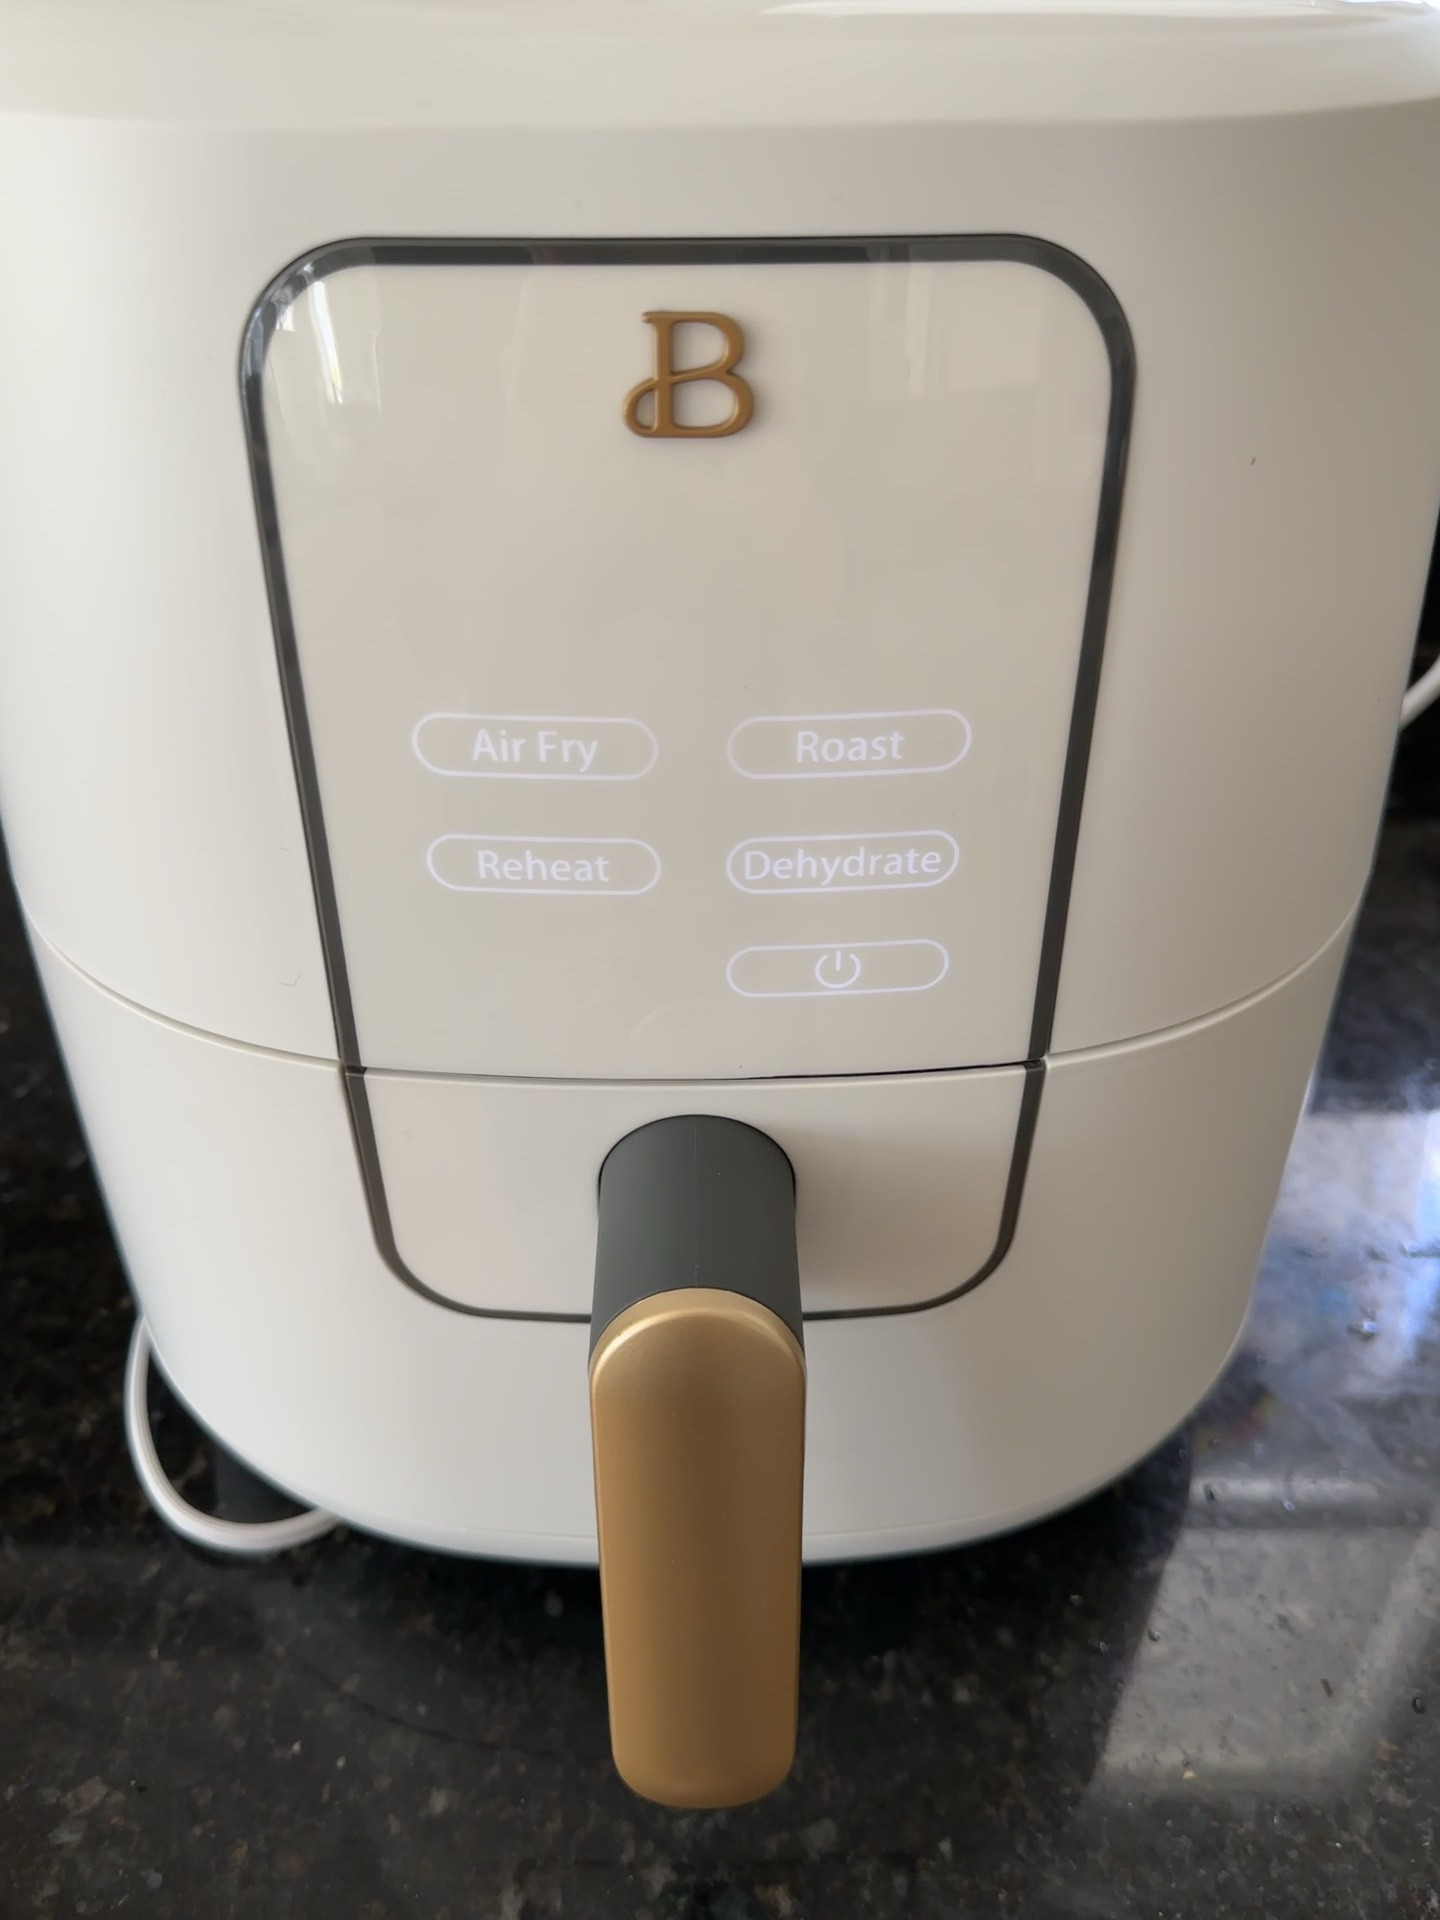  Beautiful 9QT TriZone Air Fryer, by Drew Barrymore (White  Icing) : Home & Kitchen